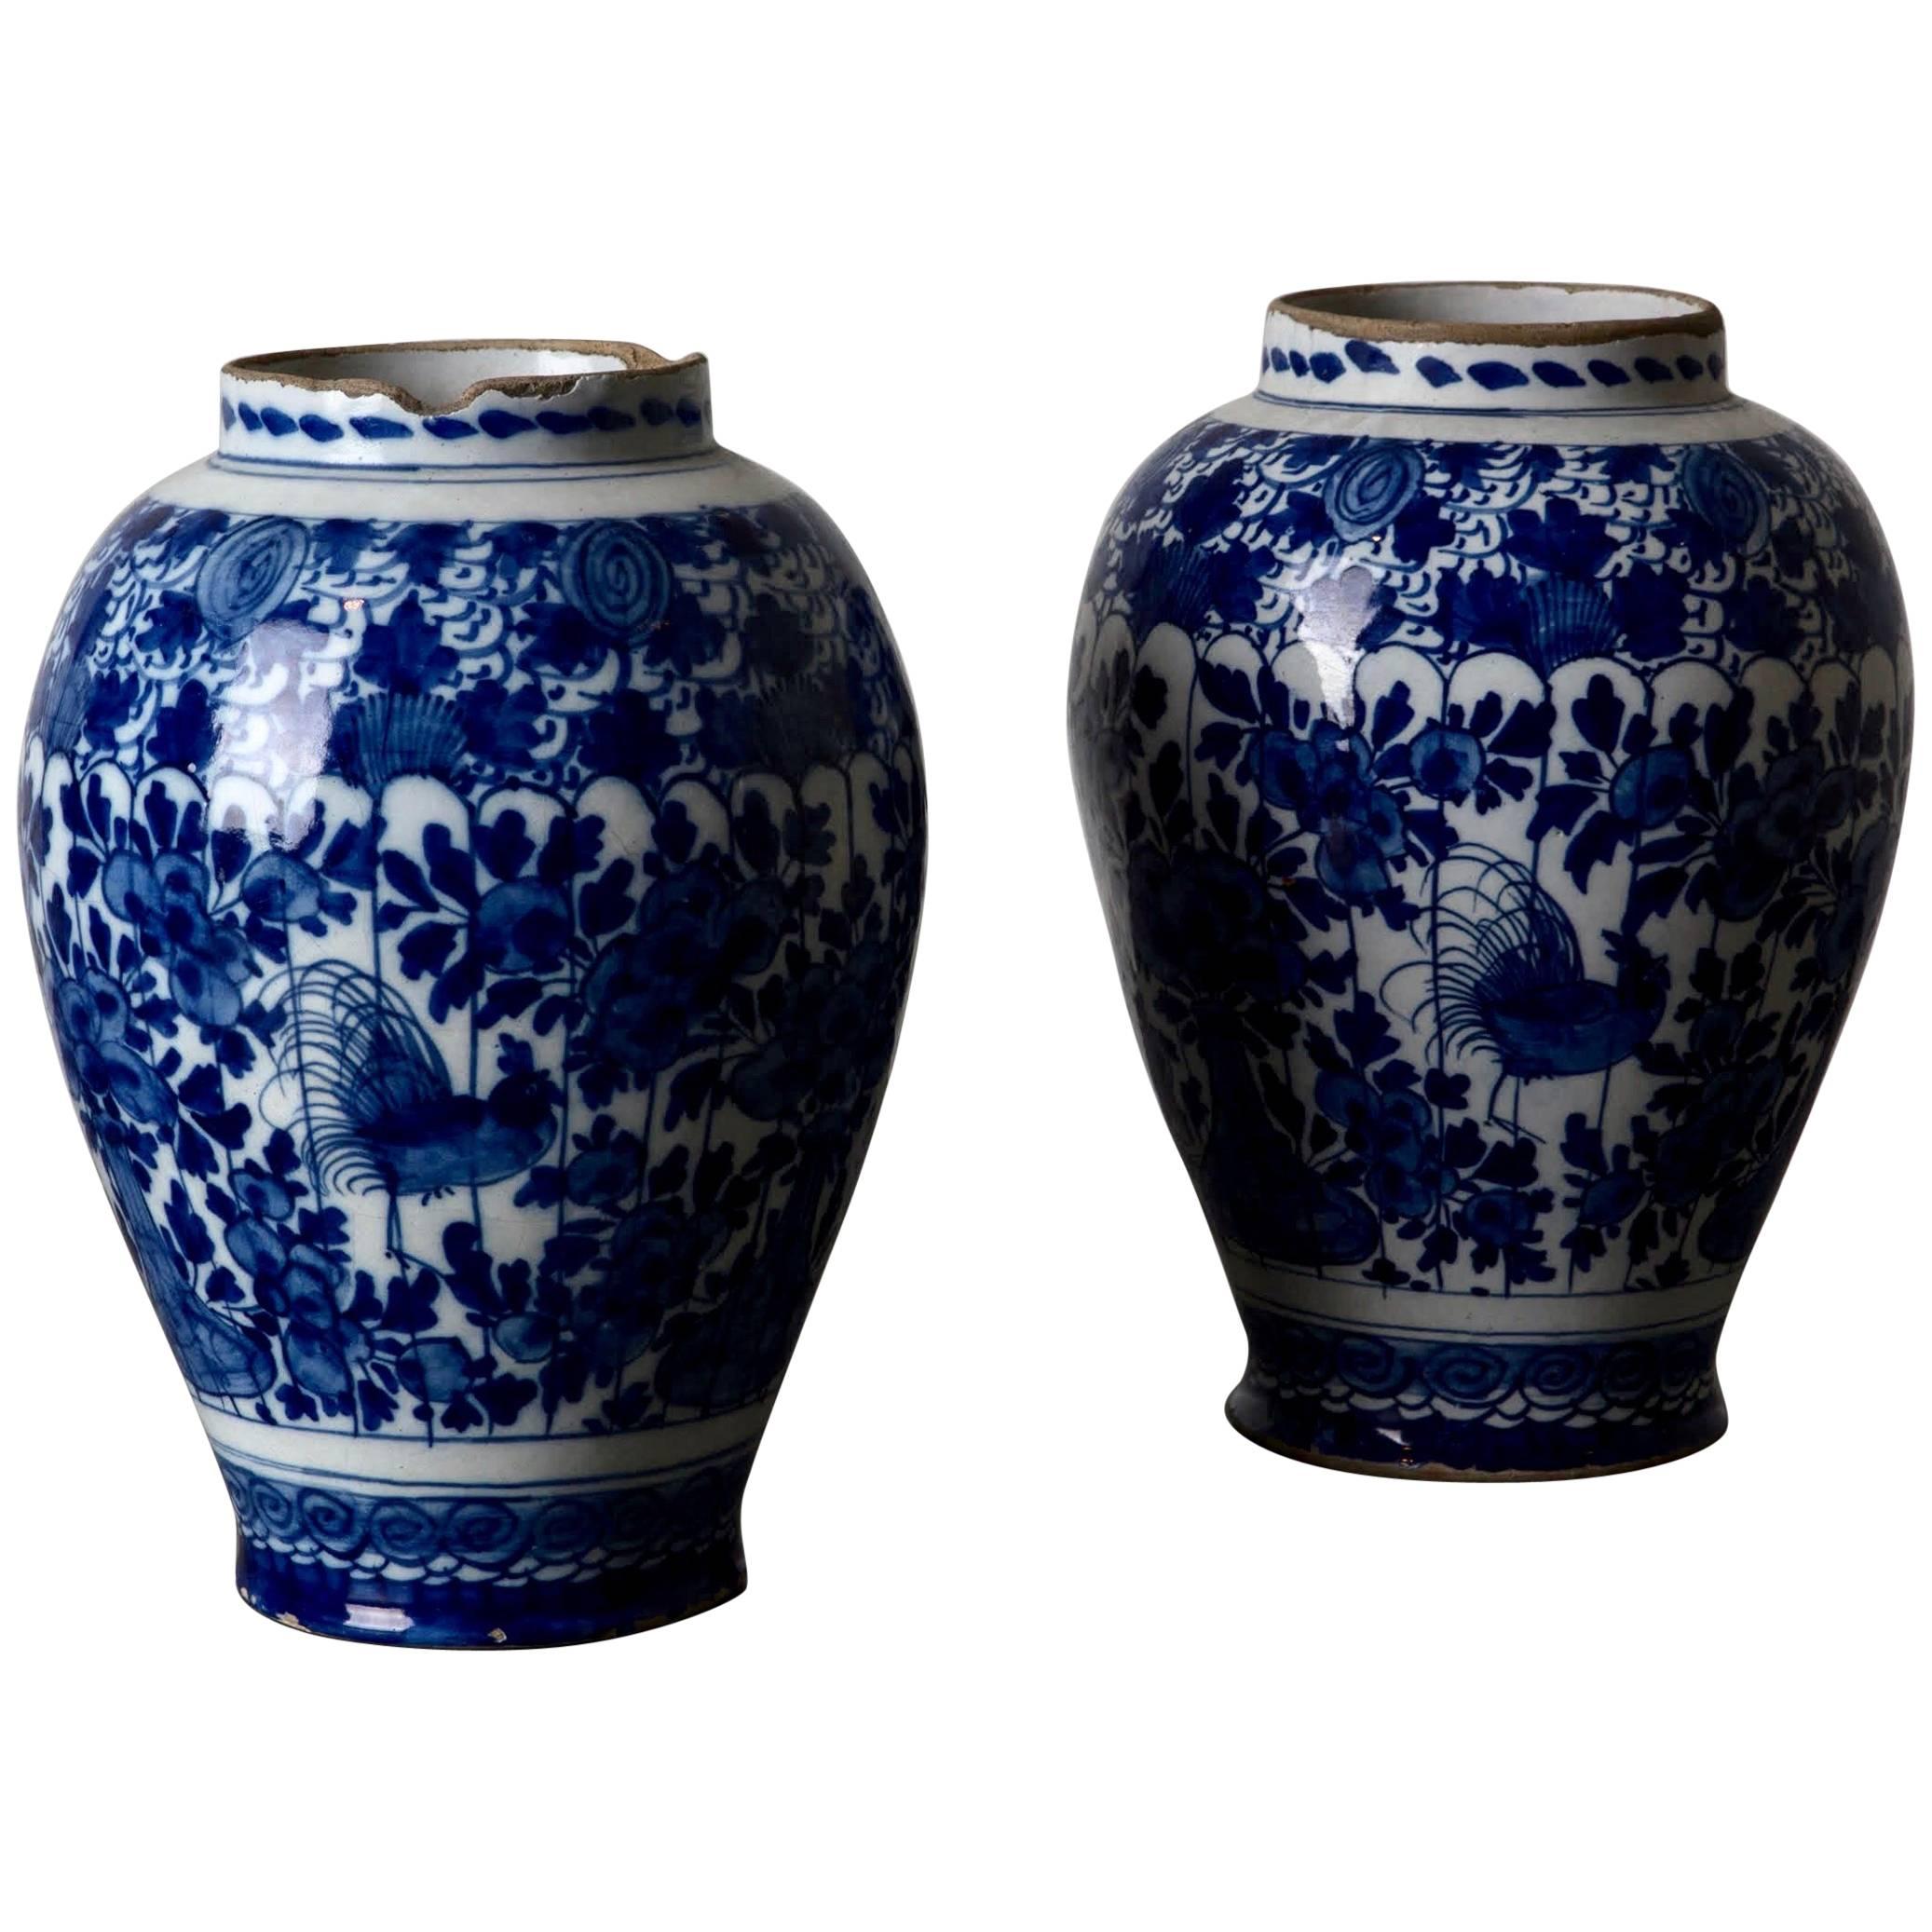 Urns Pair Delft Blue and White, 18th Century, Holland For Sale